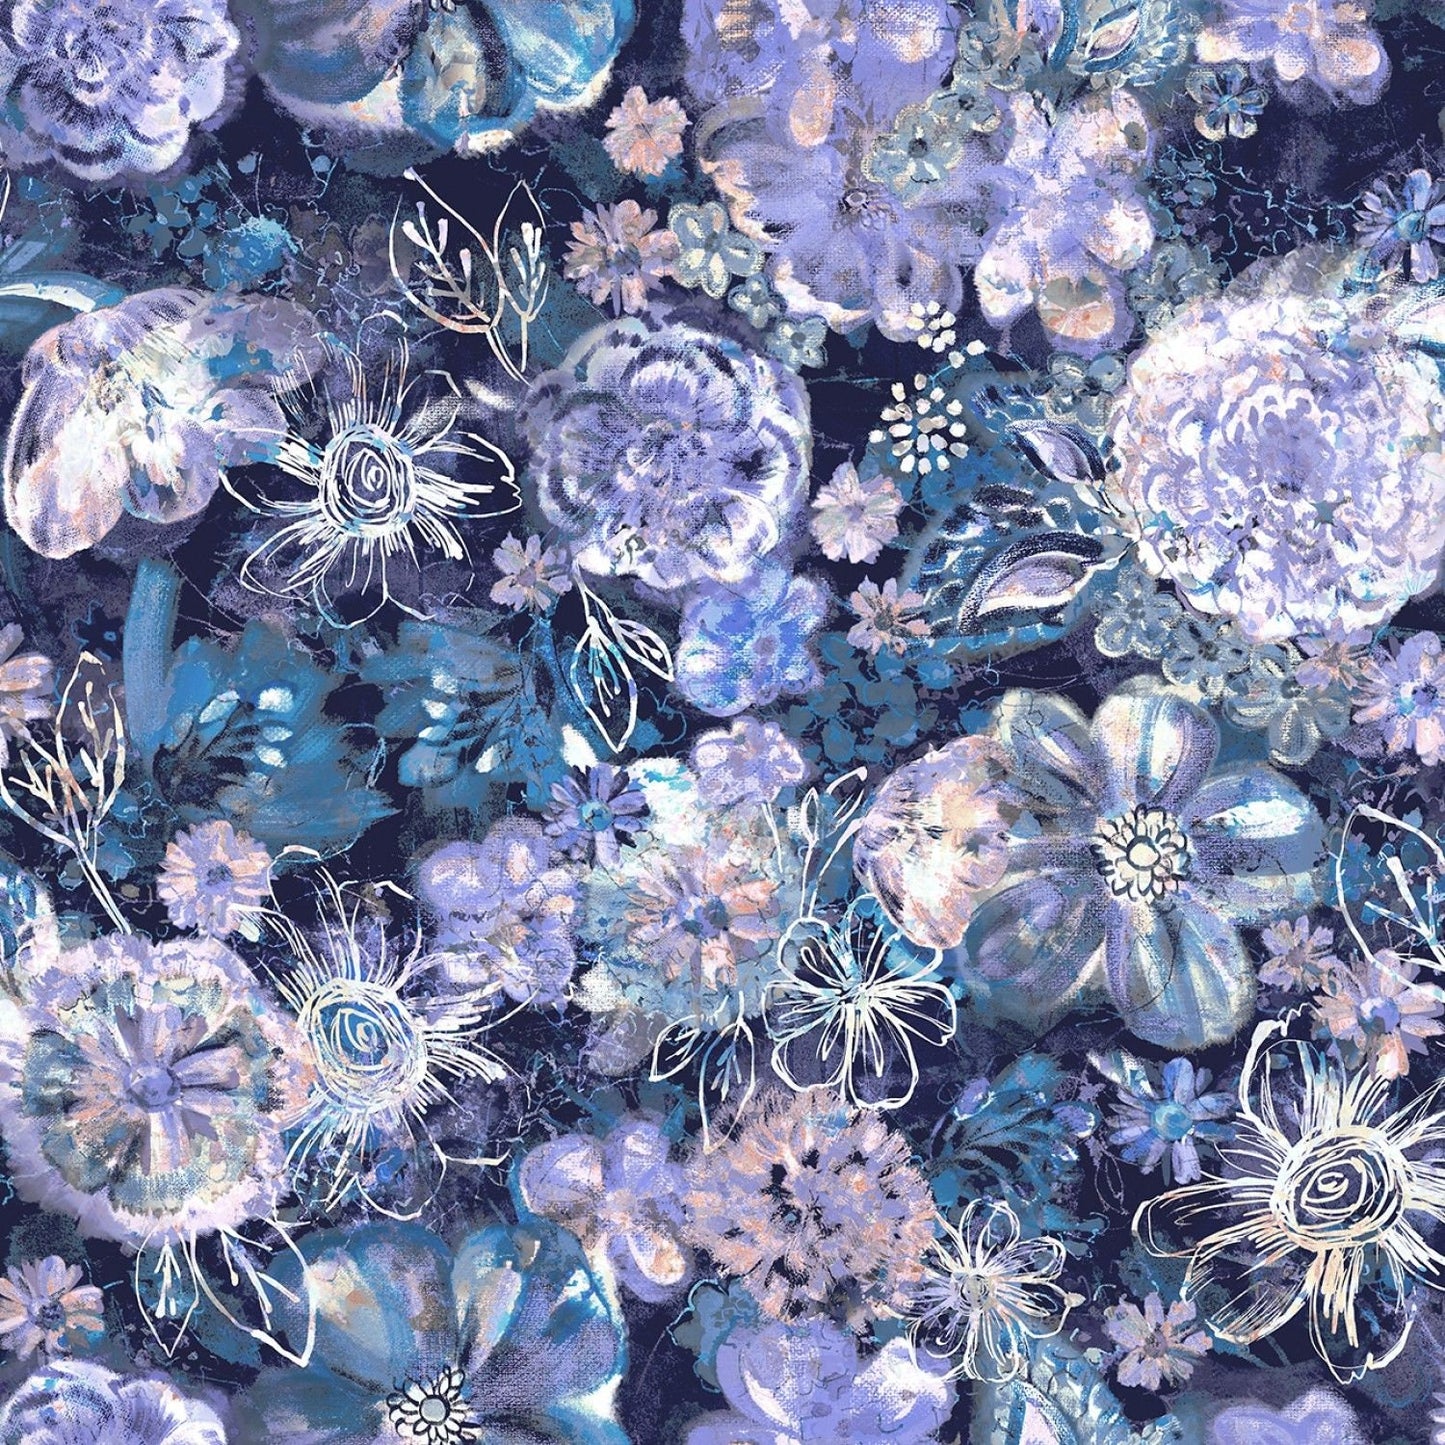 Bouquet Digiprint Floral Eclipse Navy RJ2201-NA1D Digitally Printed Cotton Woven Fabric